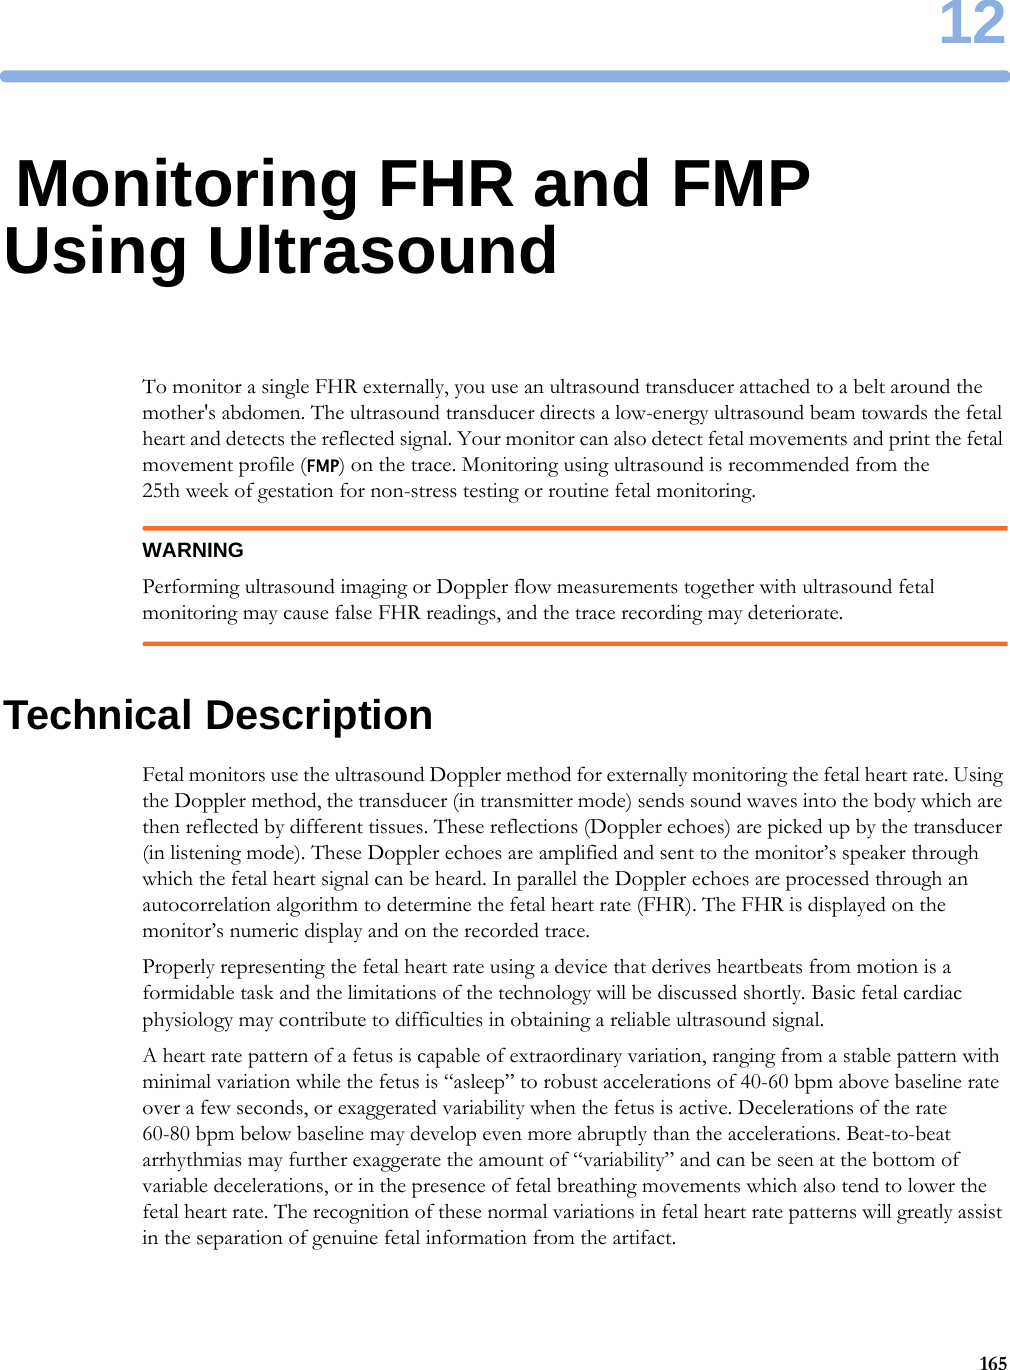 1216512Monitoring FHR and FMP Using UltrasoundTo monitor a single FHR externally, you use an ultrasound transducer attached to a belt around the mother&apos;s abdomen. The ultrasound transducer directs a low-energy ultrasound beam towards the fetal heart and detects the reflected signal. Your monitor can also detect fetal movements and print the fetal movement profile (FMP) on the trace. Monitoring using ultrasound is recommended from the 25th week of gestation for non-stress testing or routine fetal monitoring.WARNINGPerforming ultrasound imaging or Doppler flow measurements together with ultrasound fetal monitoring may cause false FHR readings, and the trace recording may deteriorate.Technical DescriptionFetal monitors use the ultrasound Doppler method for externally monitoring the fetal heart rate. Using the Doppler method, the transducer (in transmitter mode) sends sound waves into the body which are then reflected by different tissues. These reflections (Doppler echoes) are picked up by the transducer (in listening mode). These Doppler echoes are amplified and sent to the monitor’s speaker through which the fetal heart signal can be heard. In parallel the Doppler echoes are processed through an autocorrelation algorithm to determine the fetal heart rate (FHR). The FHR is displayed on the monitor’s numeric display and on the recorded trace.Properly representing the fetal heart rate using a device that derives heartbeats from motion is a formidable task and the limitations of the technology will be discussed shortly. Basic fetal cardiac physiology may contribute to difficulties in obtaining a reliable ultrasound signal.A heart rate pattern of a fetus is capable of extraordinary variation, ranging from a stable pattern with minimal variation while the fetus is “asleep” to robust accelerations of 40-60 bpm above baseline rate over a few seconds, or exaggerated variability when the fetus is active. Decelerations of the rate 60-80 bpm below baseline may develop even more abruptly than the accelerations. Beat-to-beat arrhythmias may further exaggerate the amount of “variability” and can be seen at the bottom of variable decelerations, or in the presence of fetal breathing movements which also tend to lower the fetal heart rate. The recognition of these normal variations in fetal heart rate patterns will greatly assist in the separation of genuine fetal information from the artifact.